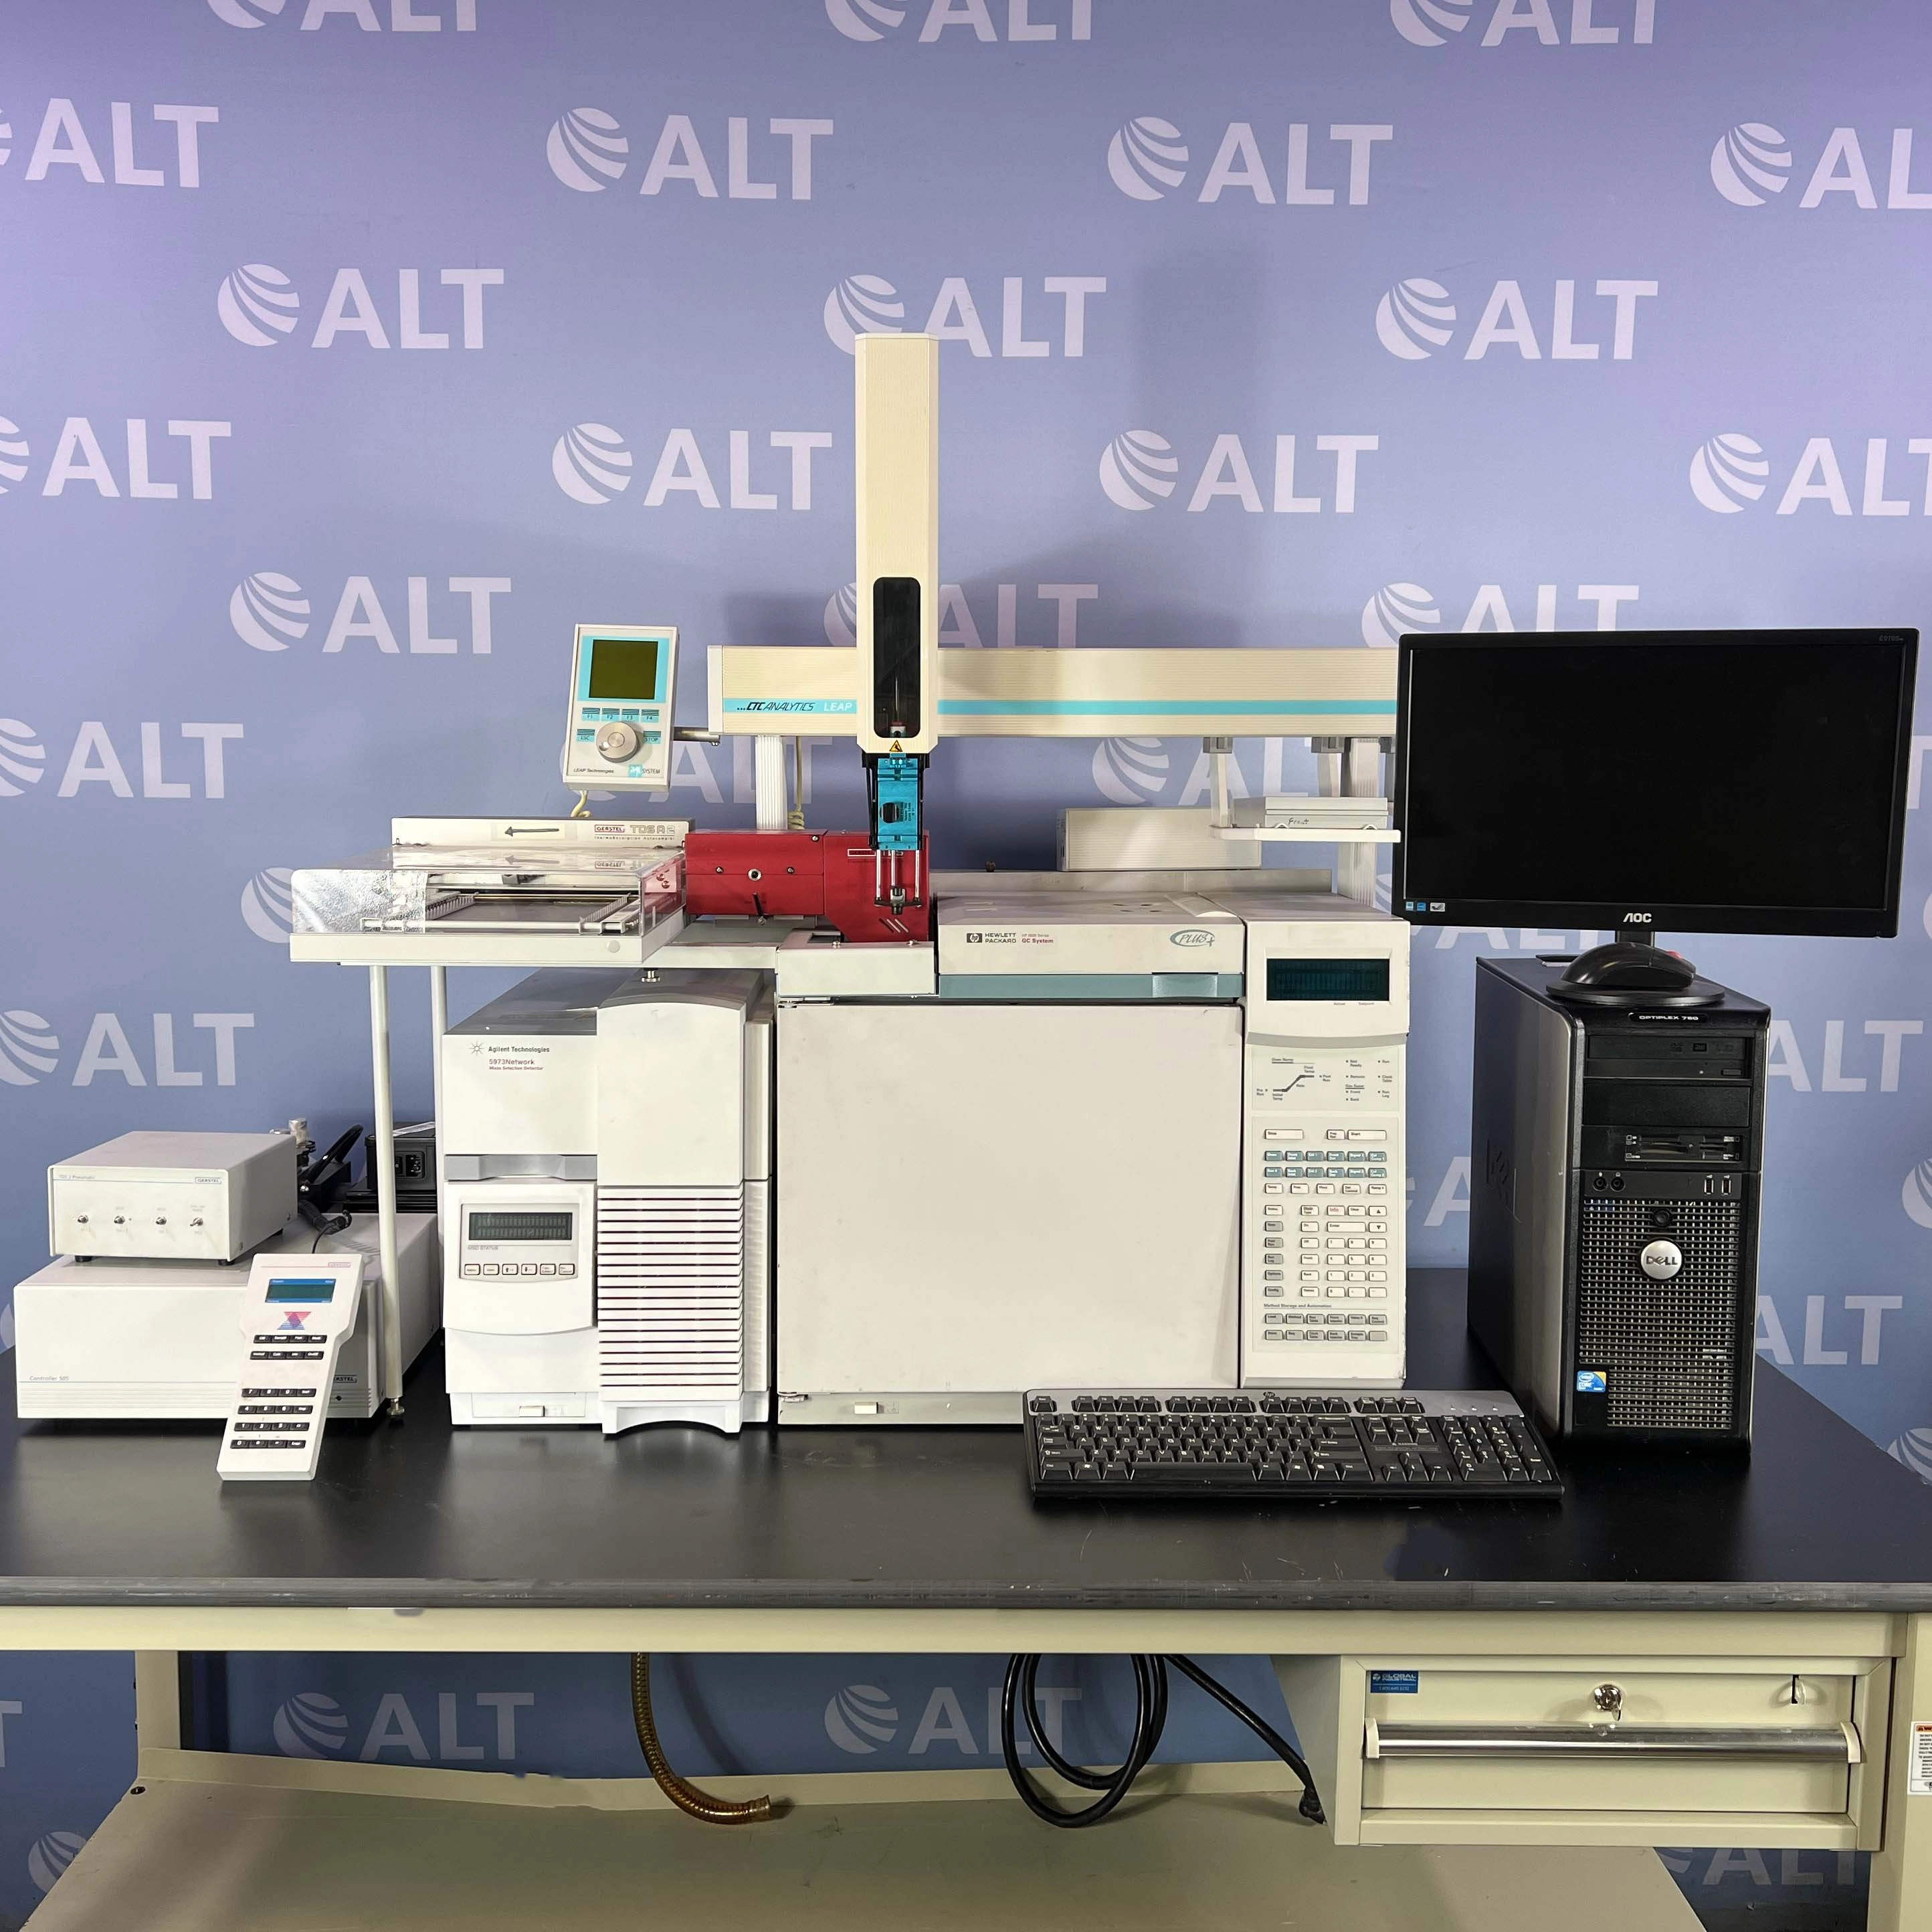 Agilent 6890 Plus With 5973N MSD, Leap Autosampler, Gerstel ThermoDesorption System And Vacuum Pump